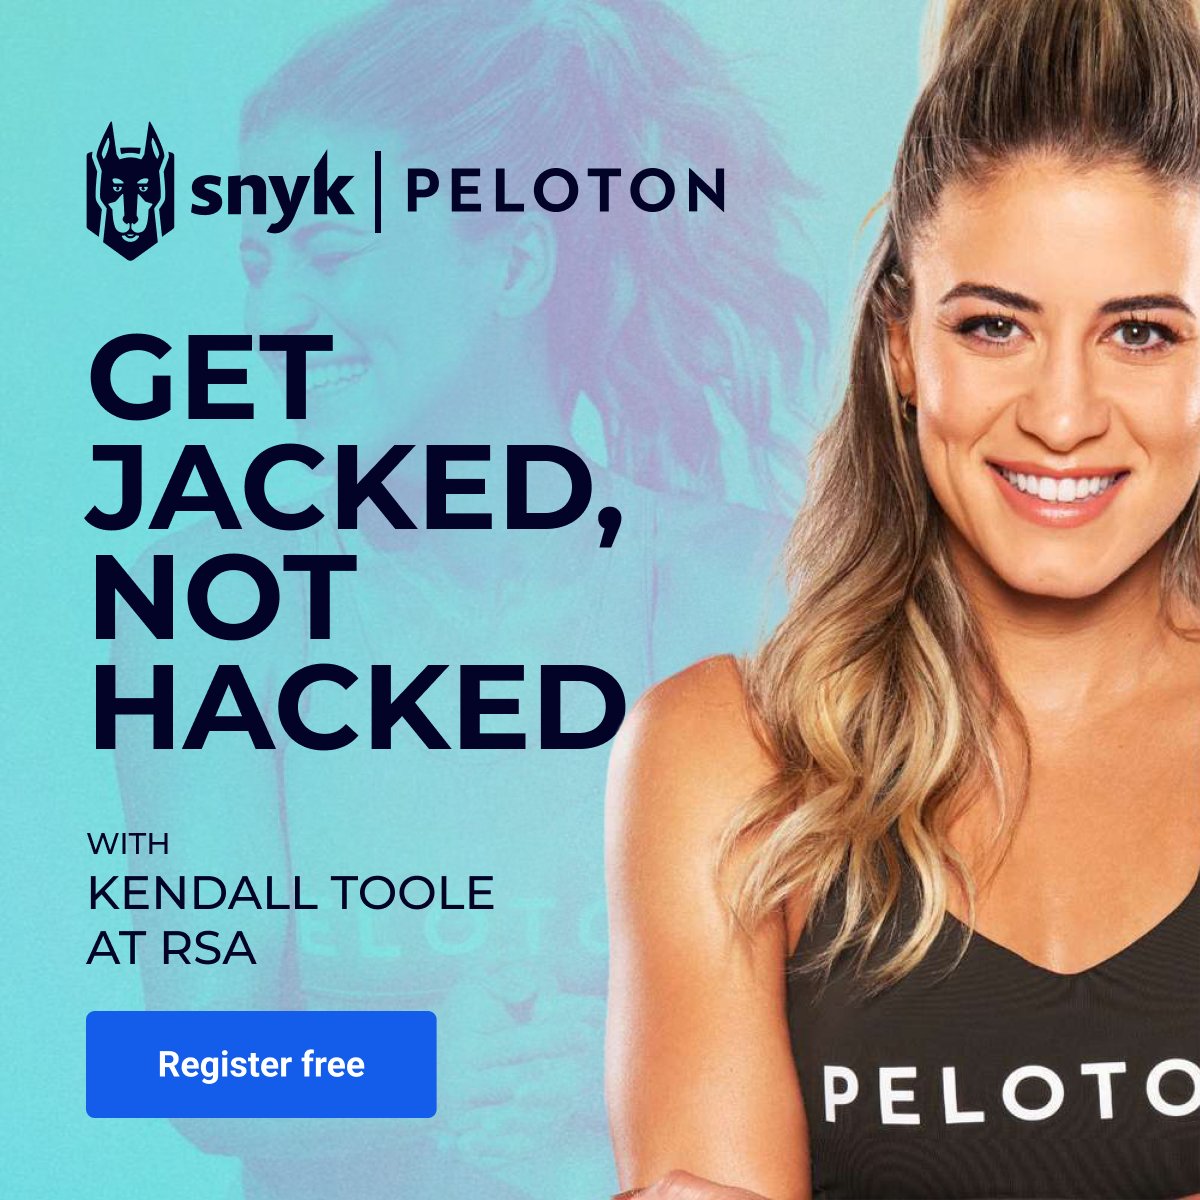 Get ready to knock out your #AppSec challenges. 🥊 Join Snyk THIS WEEK at #RSAC for this exclusive bootcamp led by @onepeloton's @fitxkendall! This high-energy session will get your blood pumping, setting you up for a successful day at the show! snyk.co/ugO7g